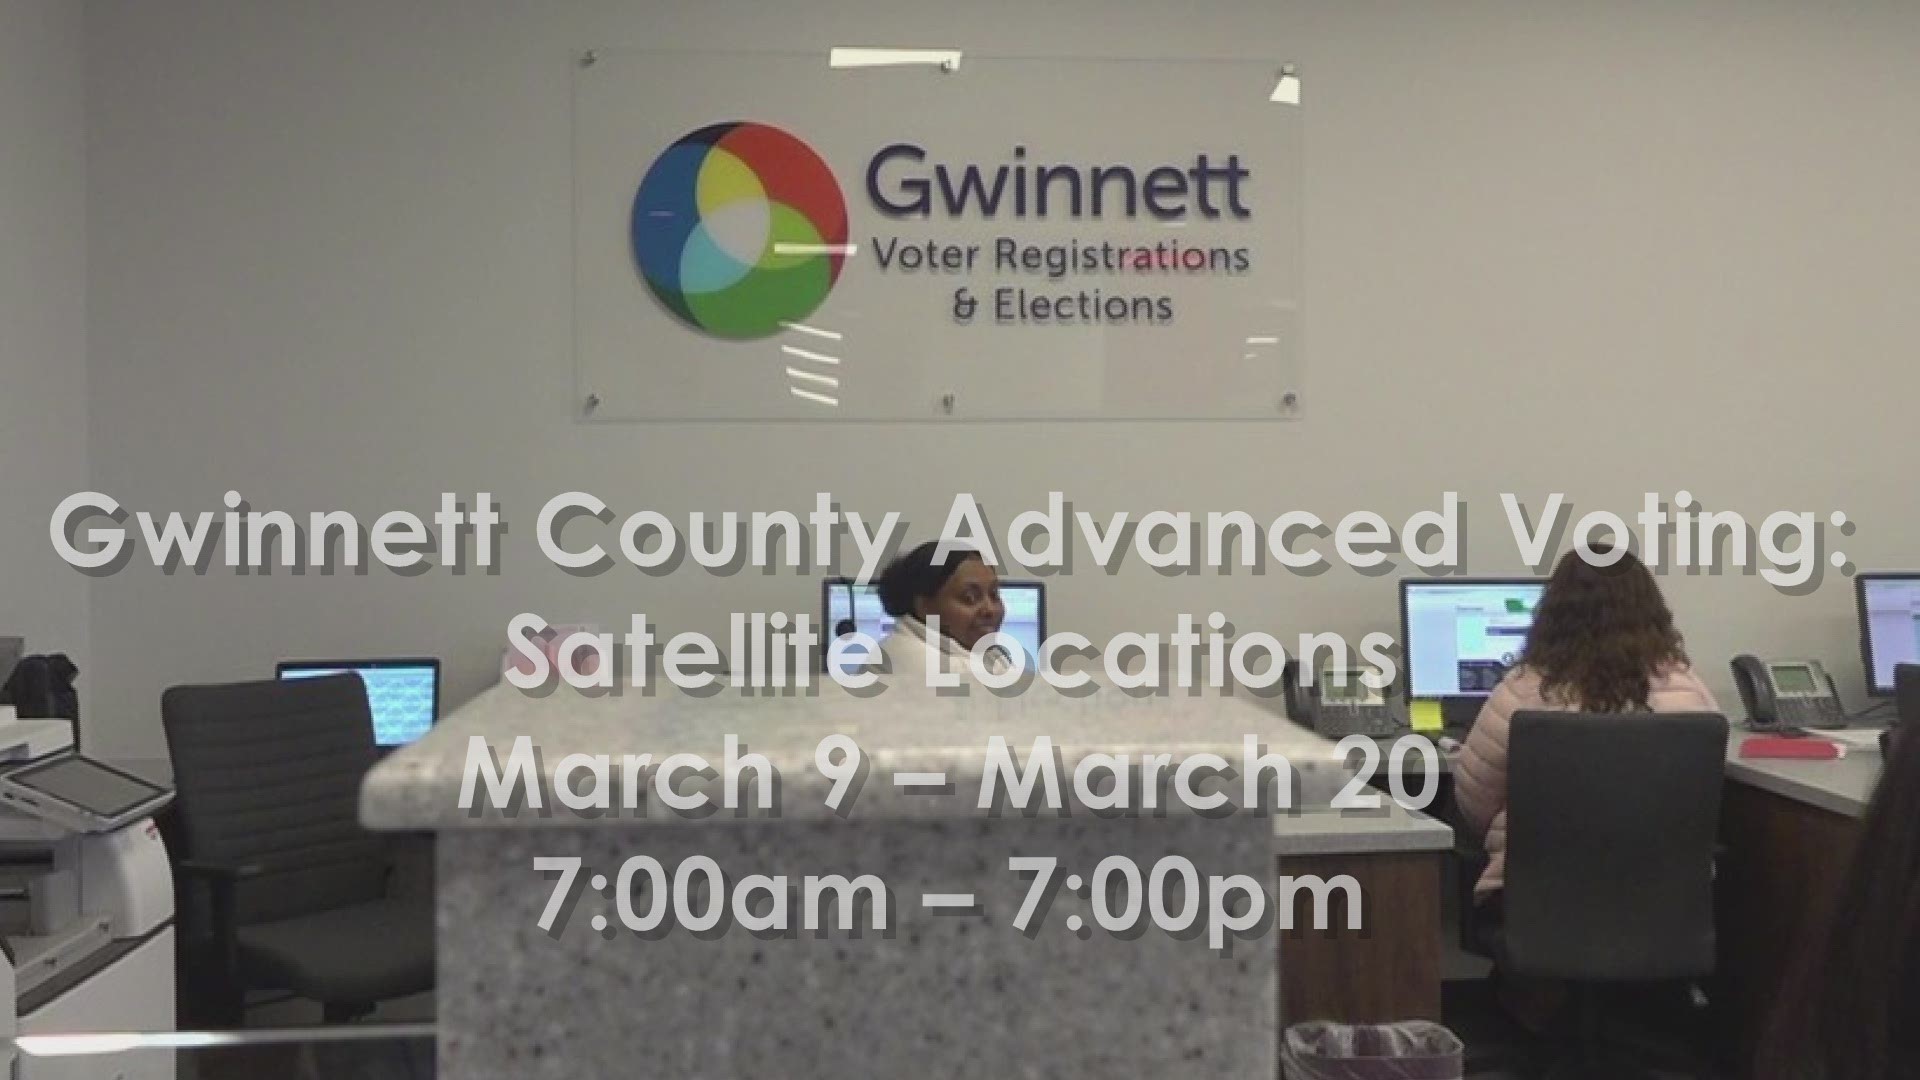 Gwinnett County will have eight polling locations open until March 27.